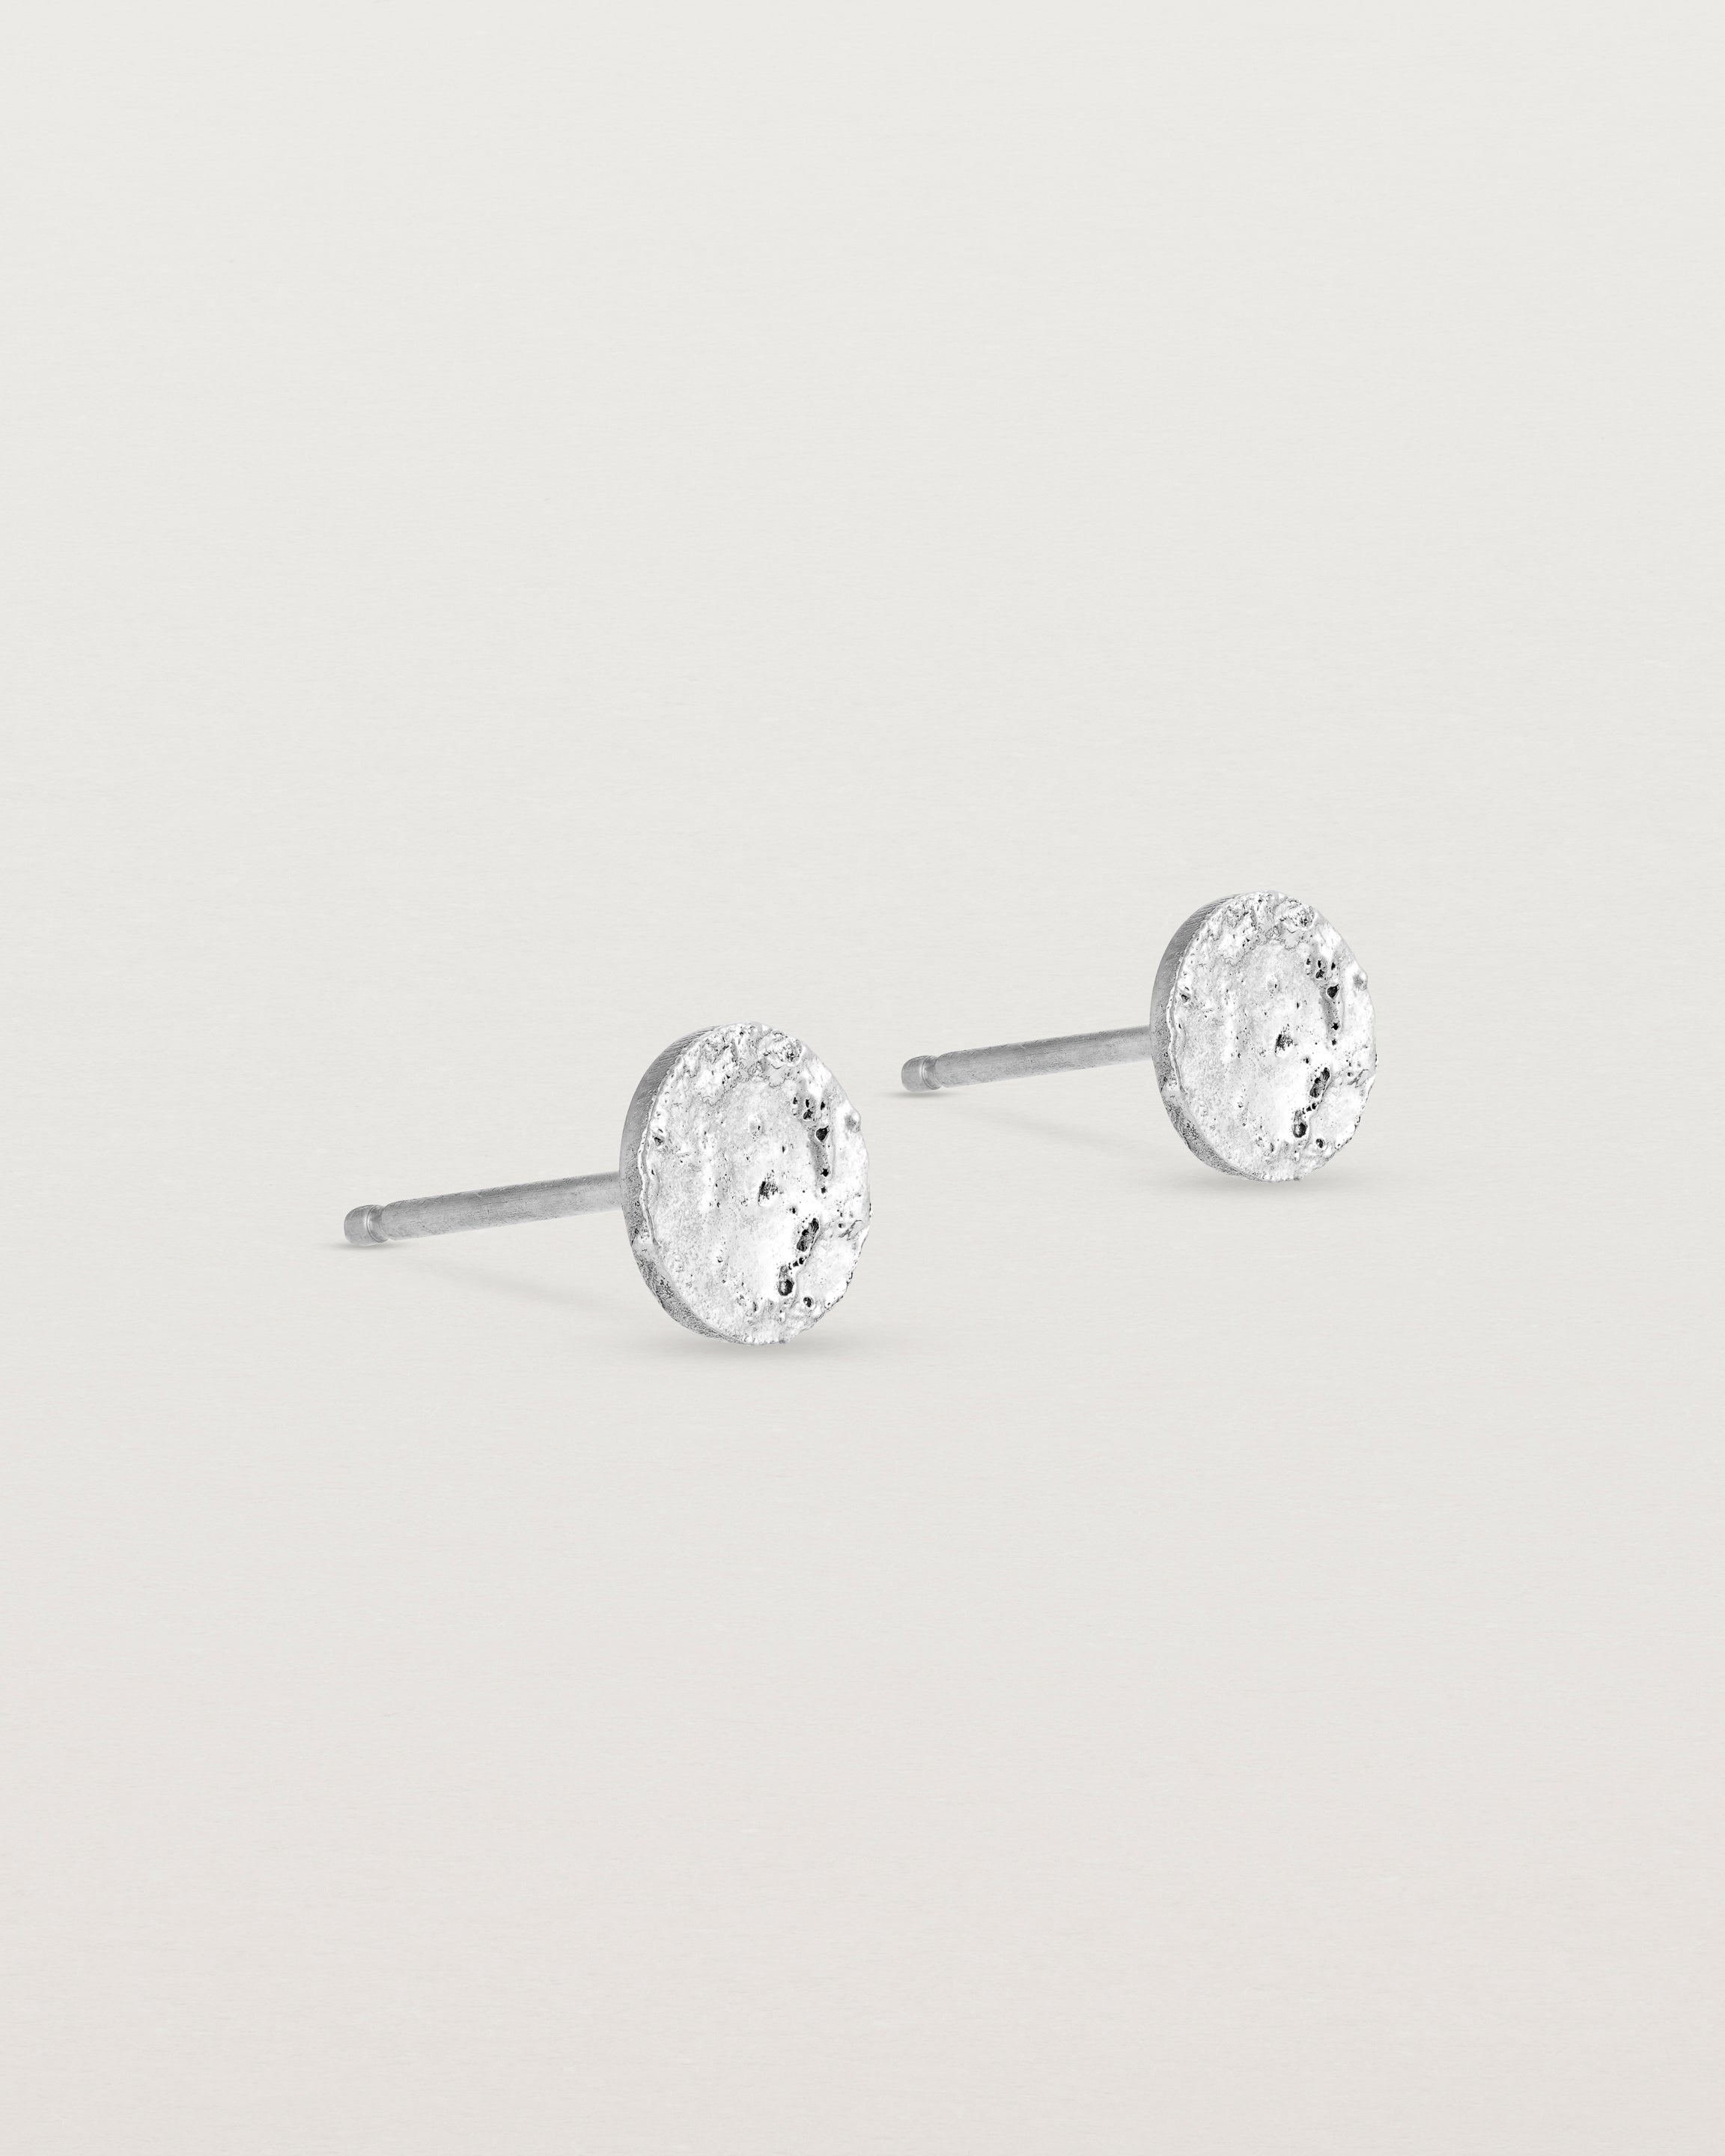 A pair of textured circular sterling silver studs